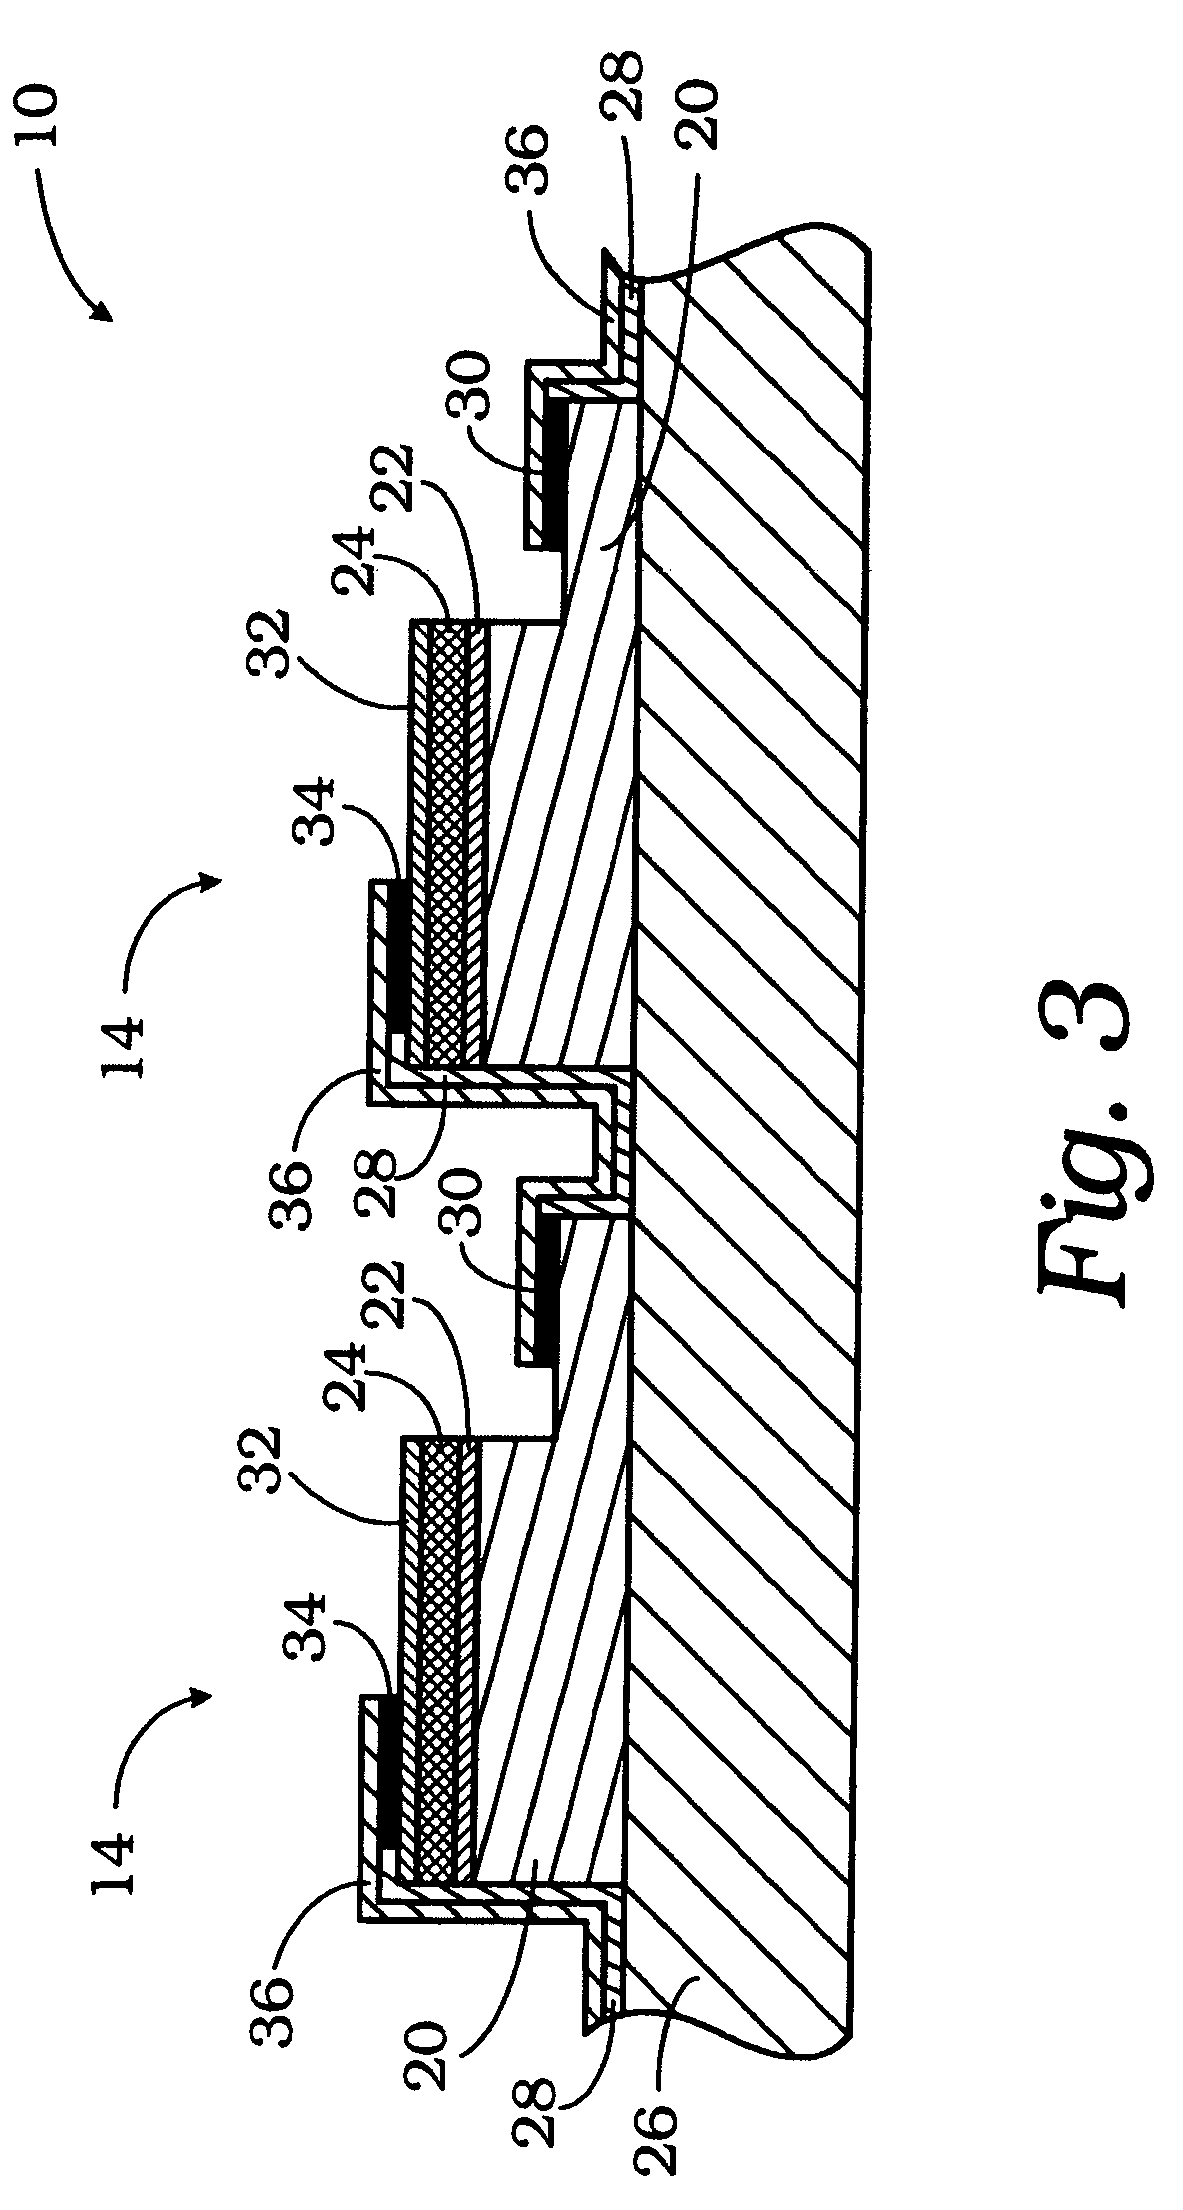 Light emitting diodes for high AC voltage operation and general lighting